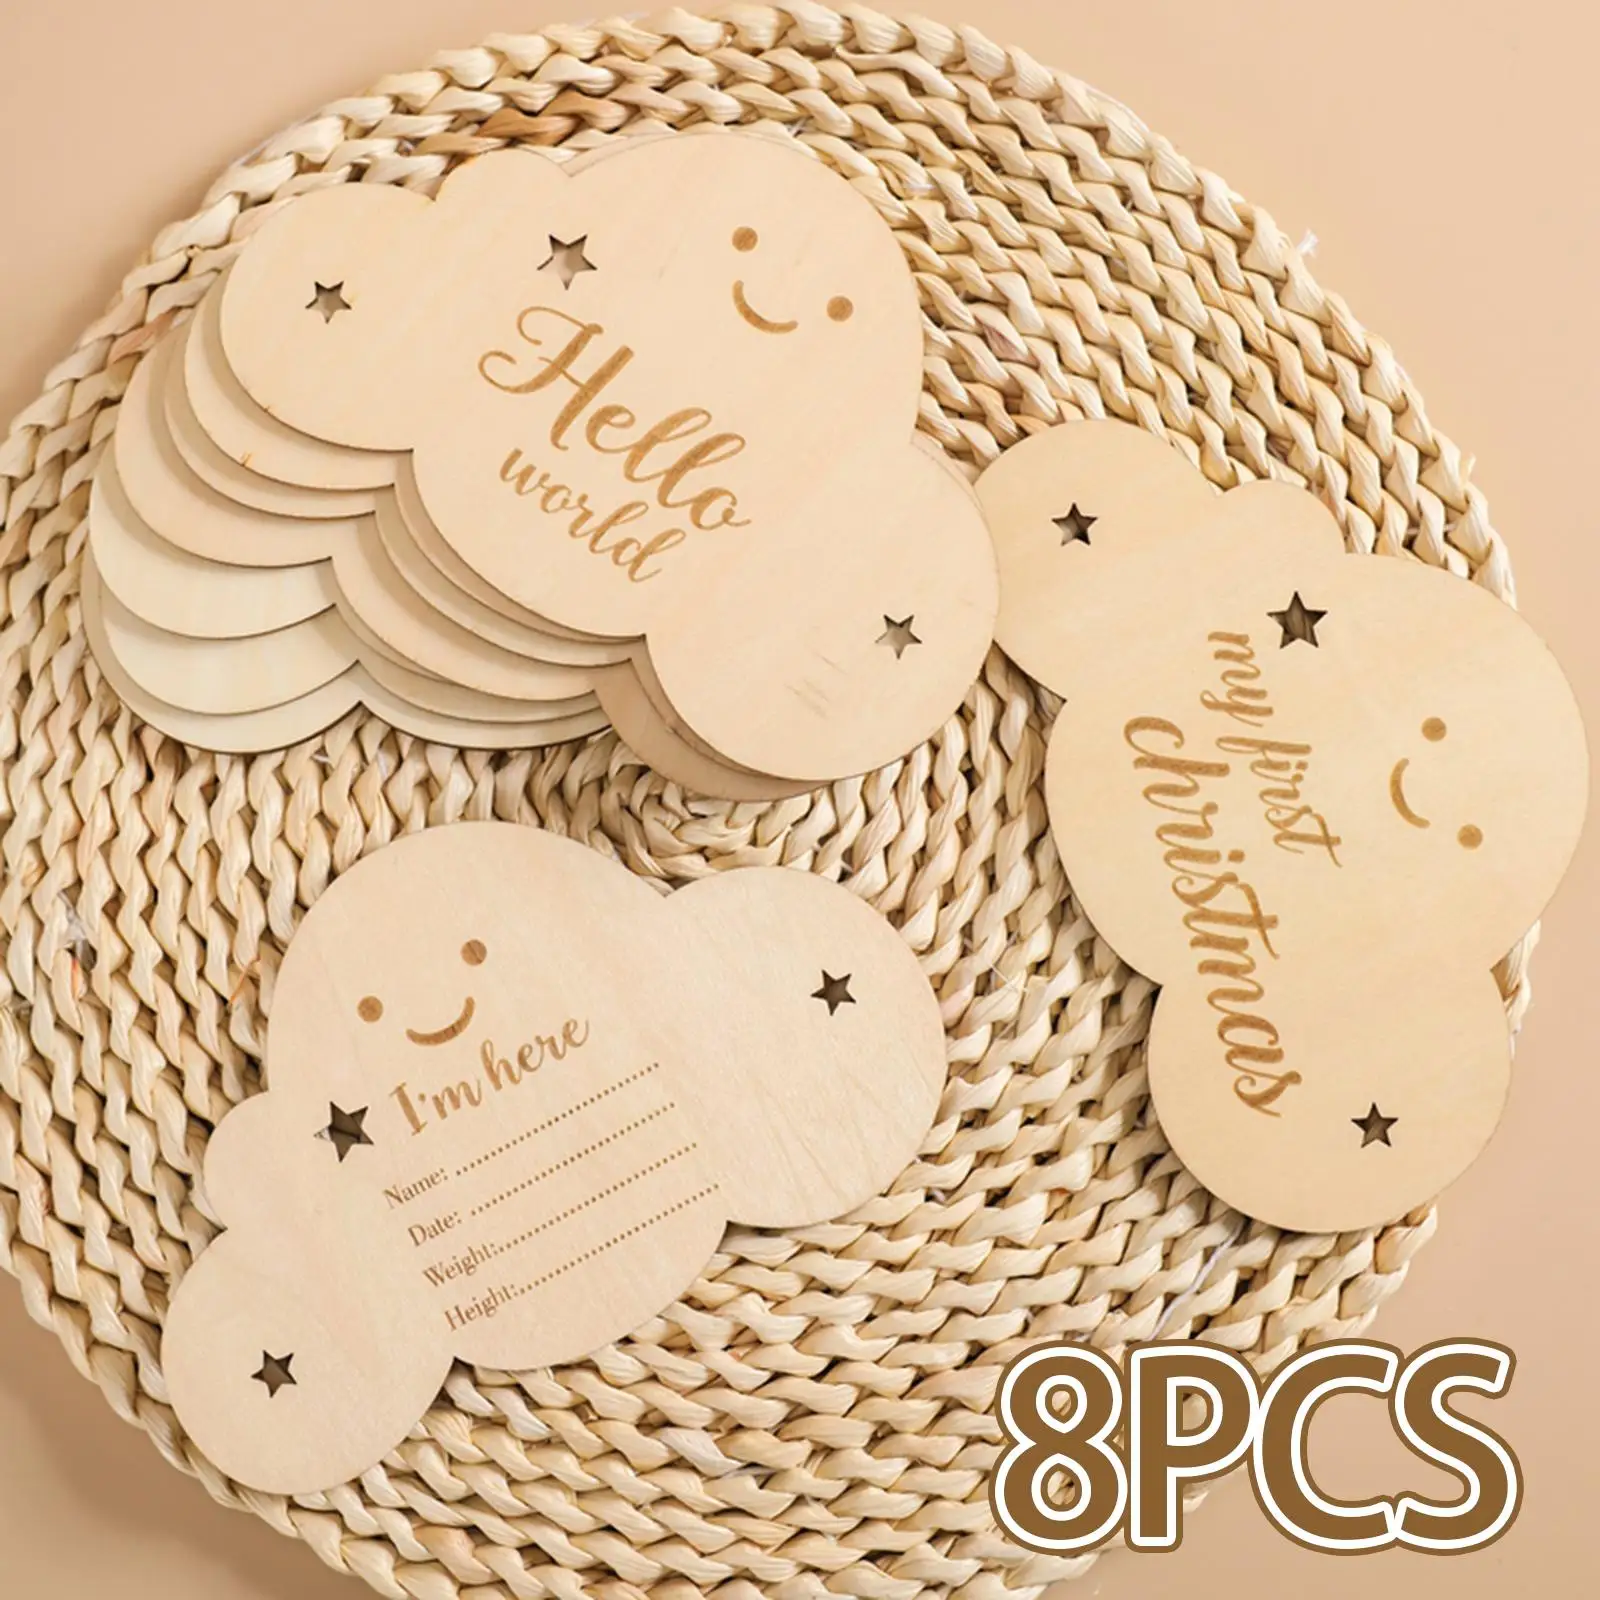 8 Pieces Wooden Baby Milestone Cards Smooth Surface Photography Accessories for Newborn to Age 1 Cute Clouds Shape Newborn Gifts